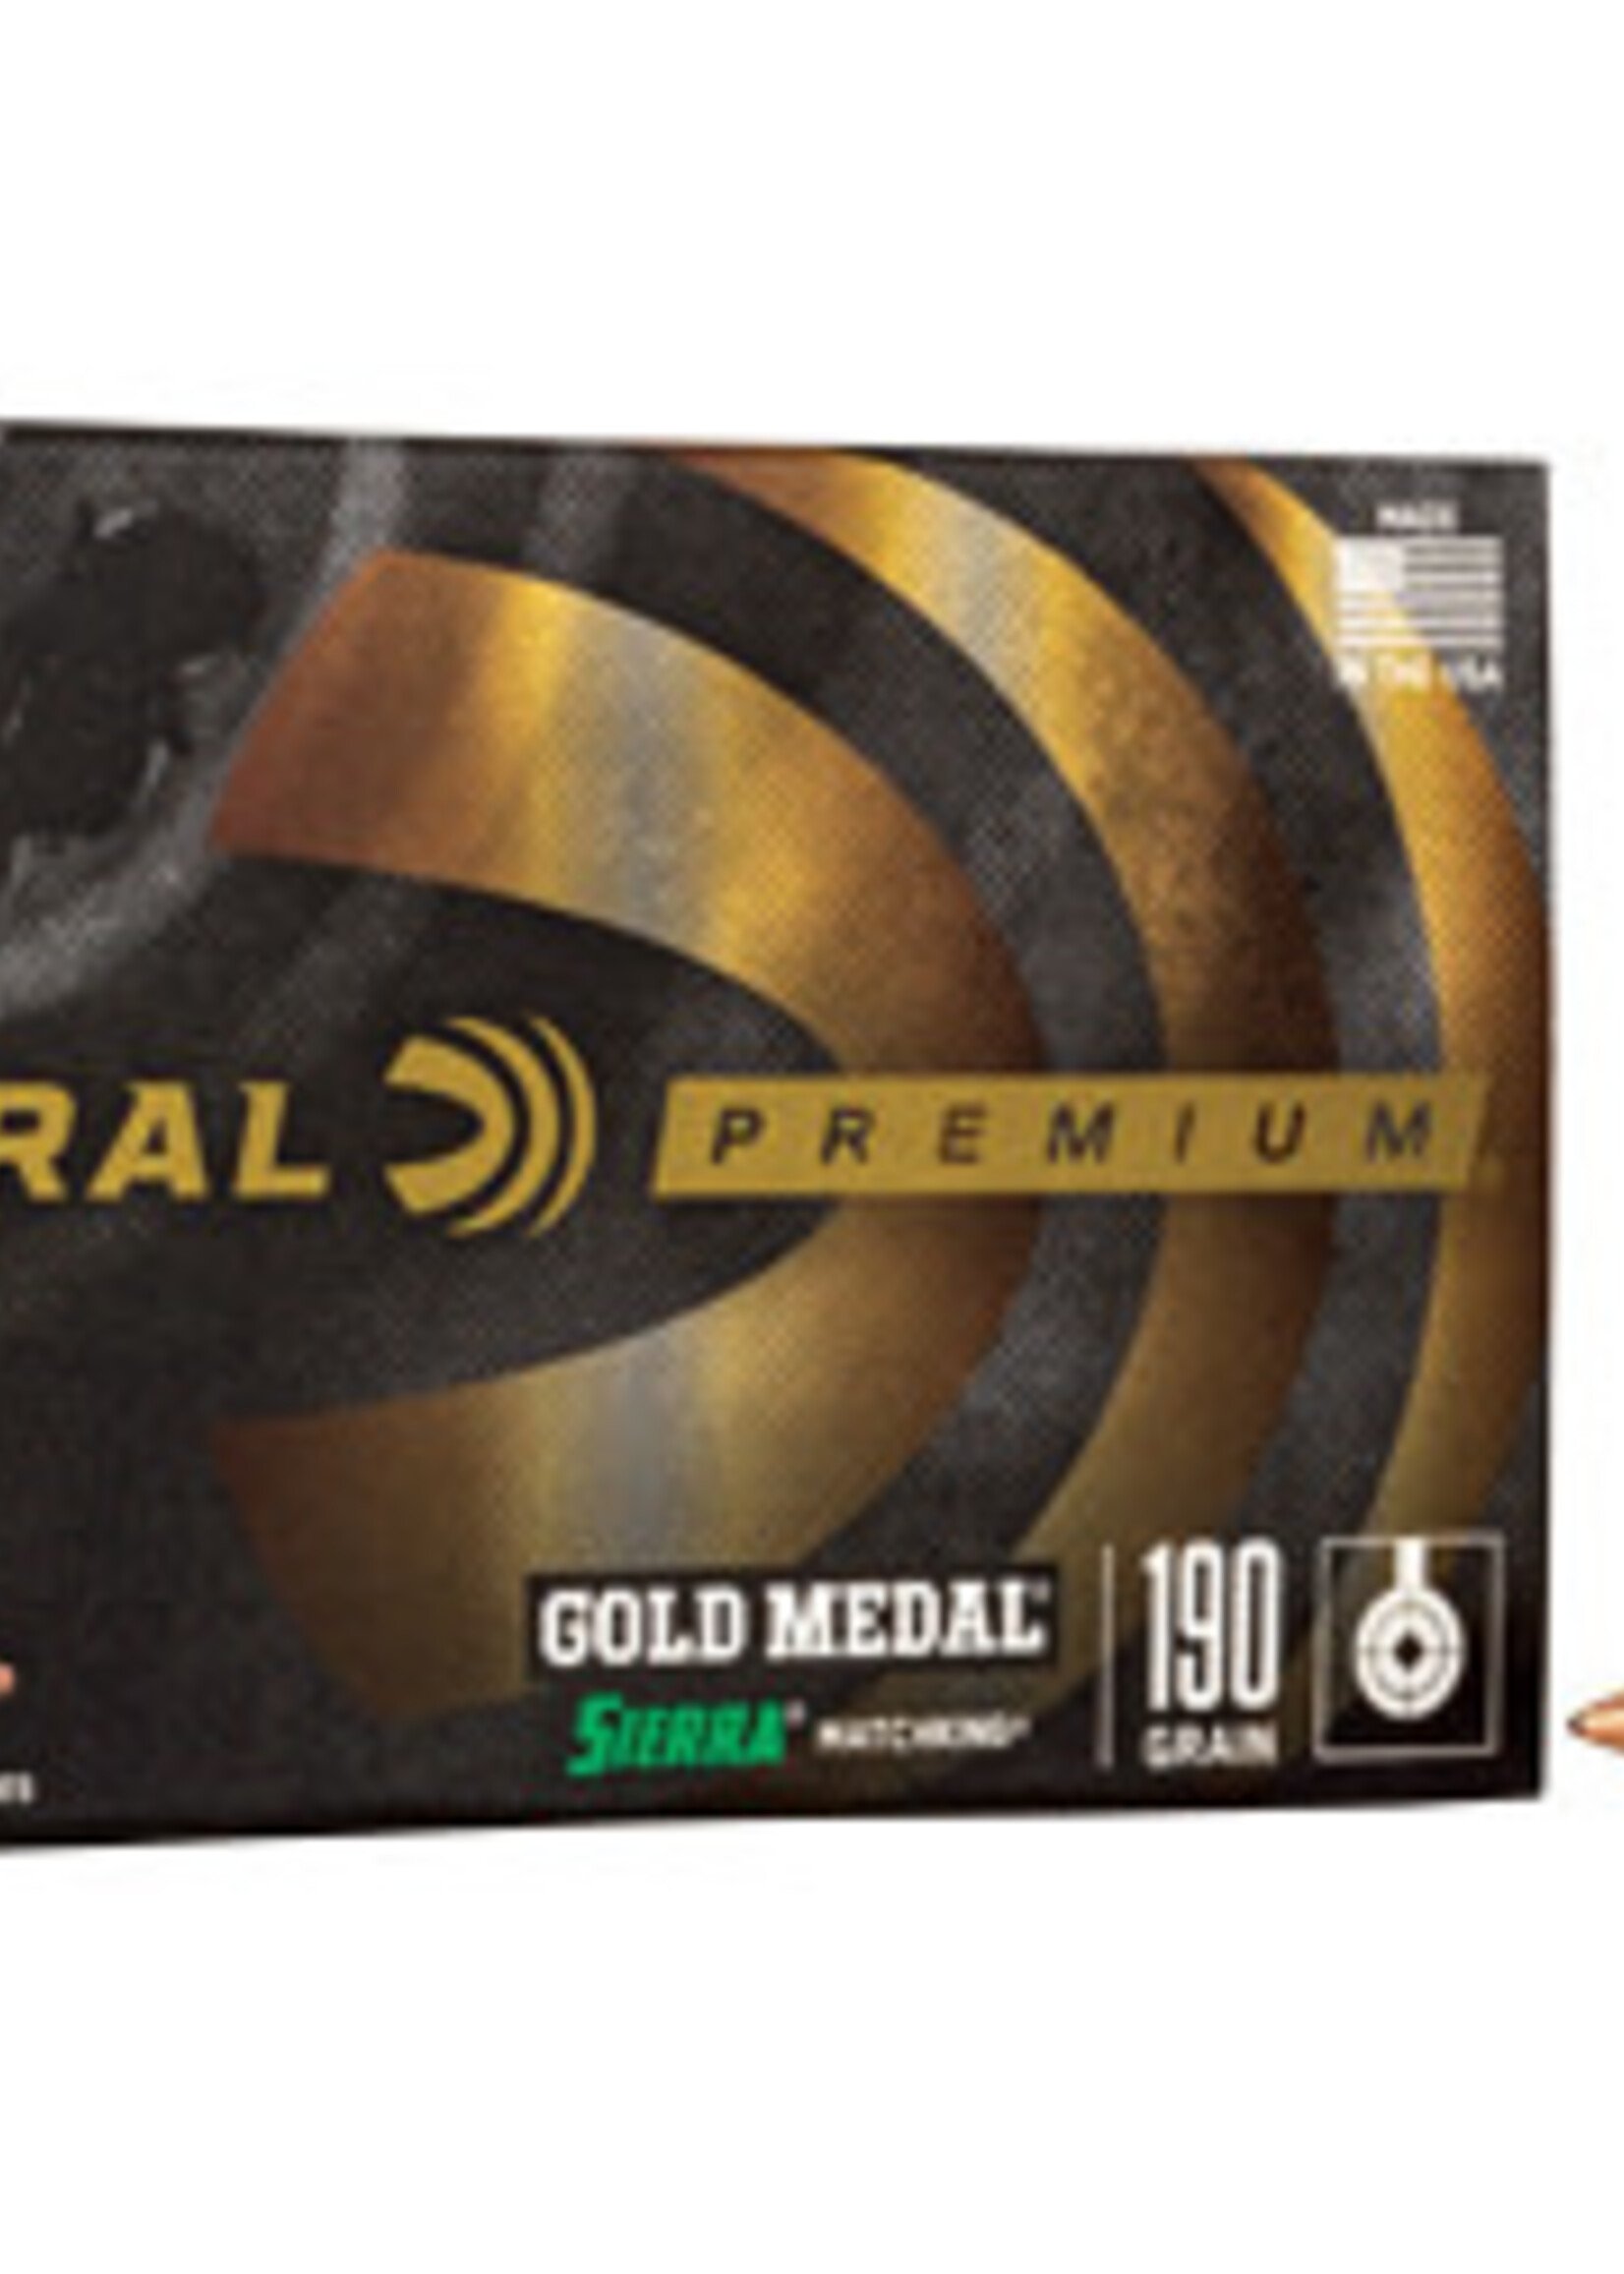 Federal Ammunition Federal, Gold Medal, 300 WIN MAG, 190 Grain, Boat Tail, Hollow Point, 20 Round Box